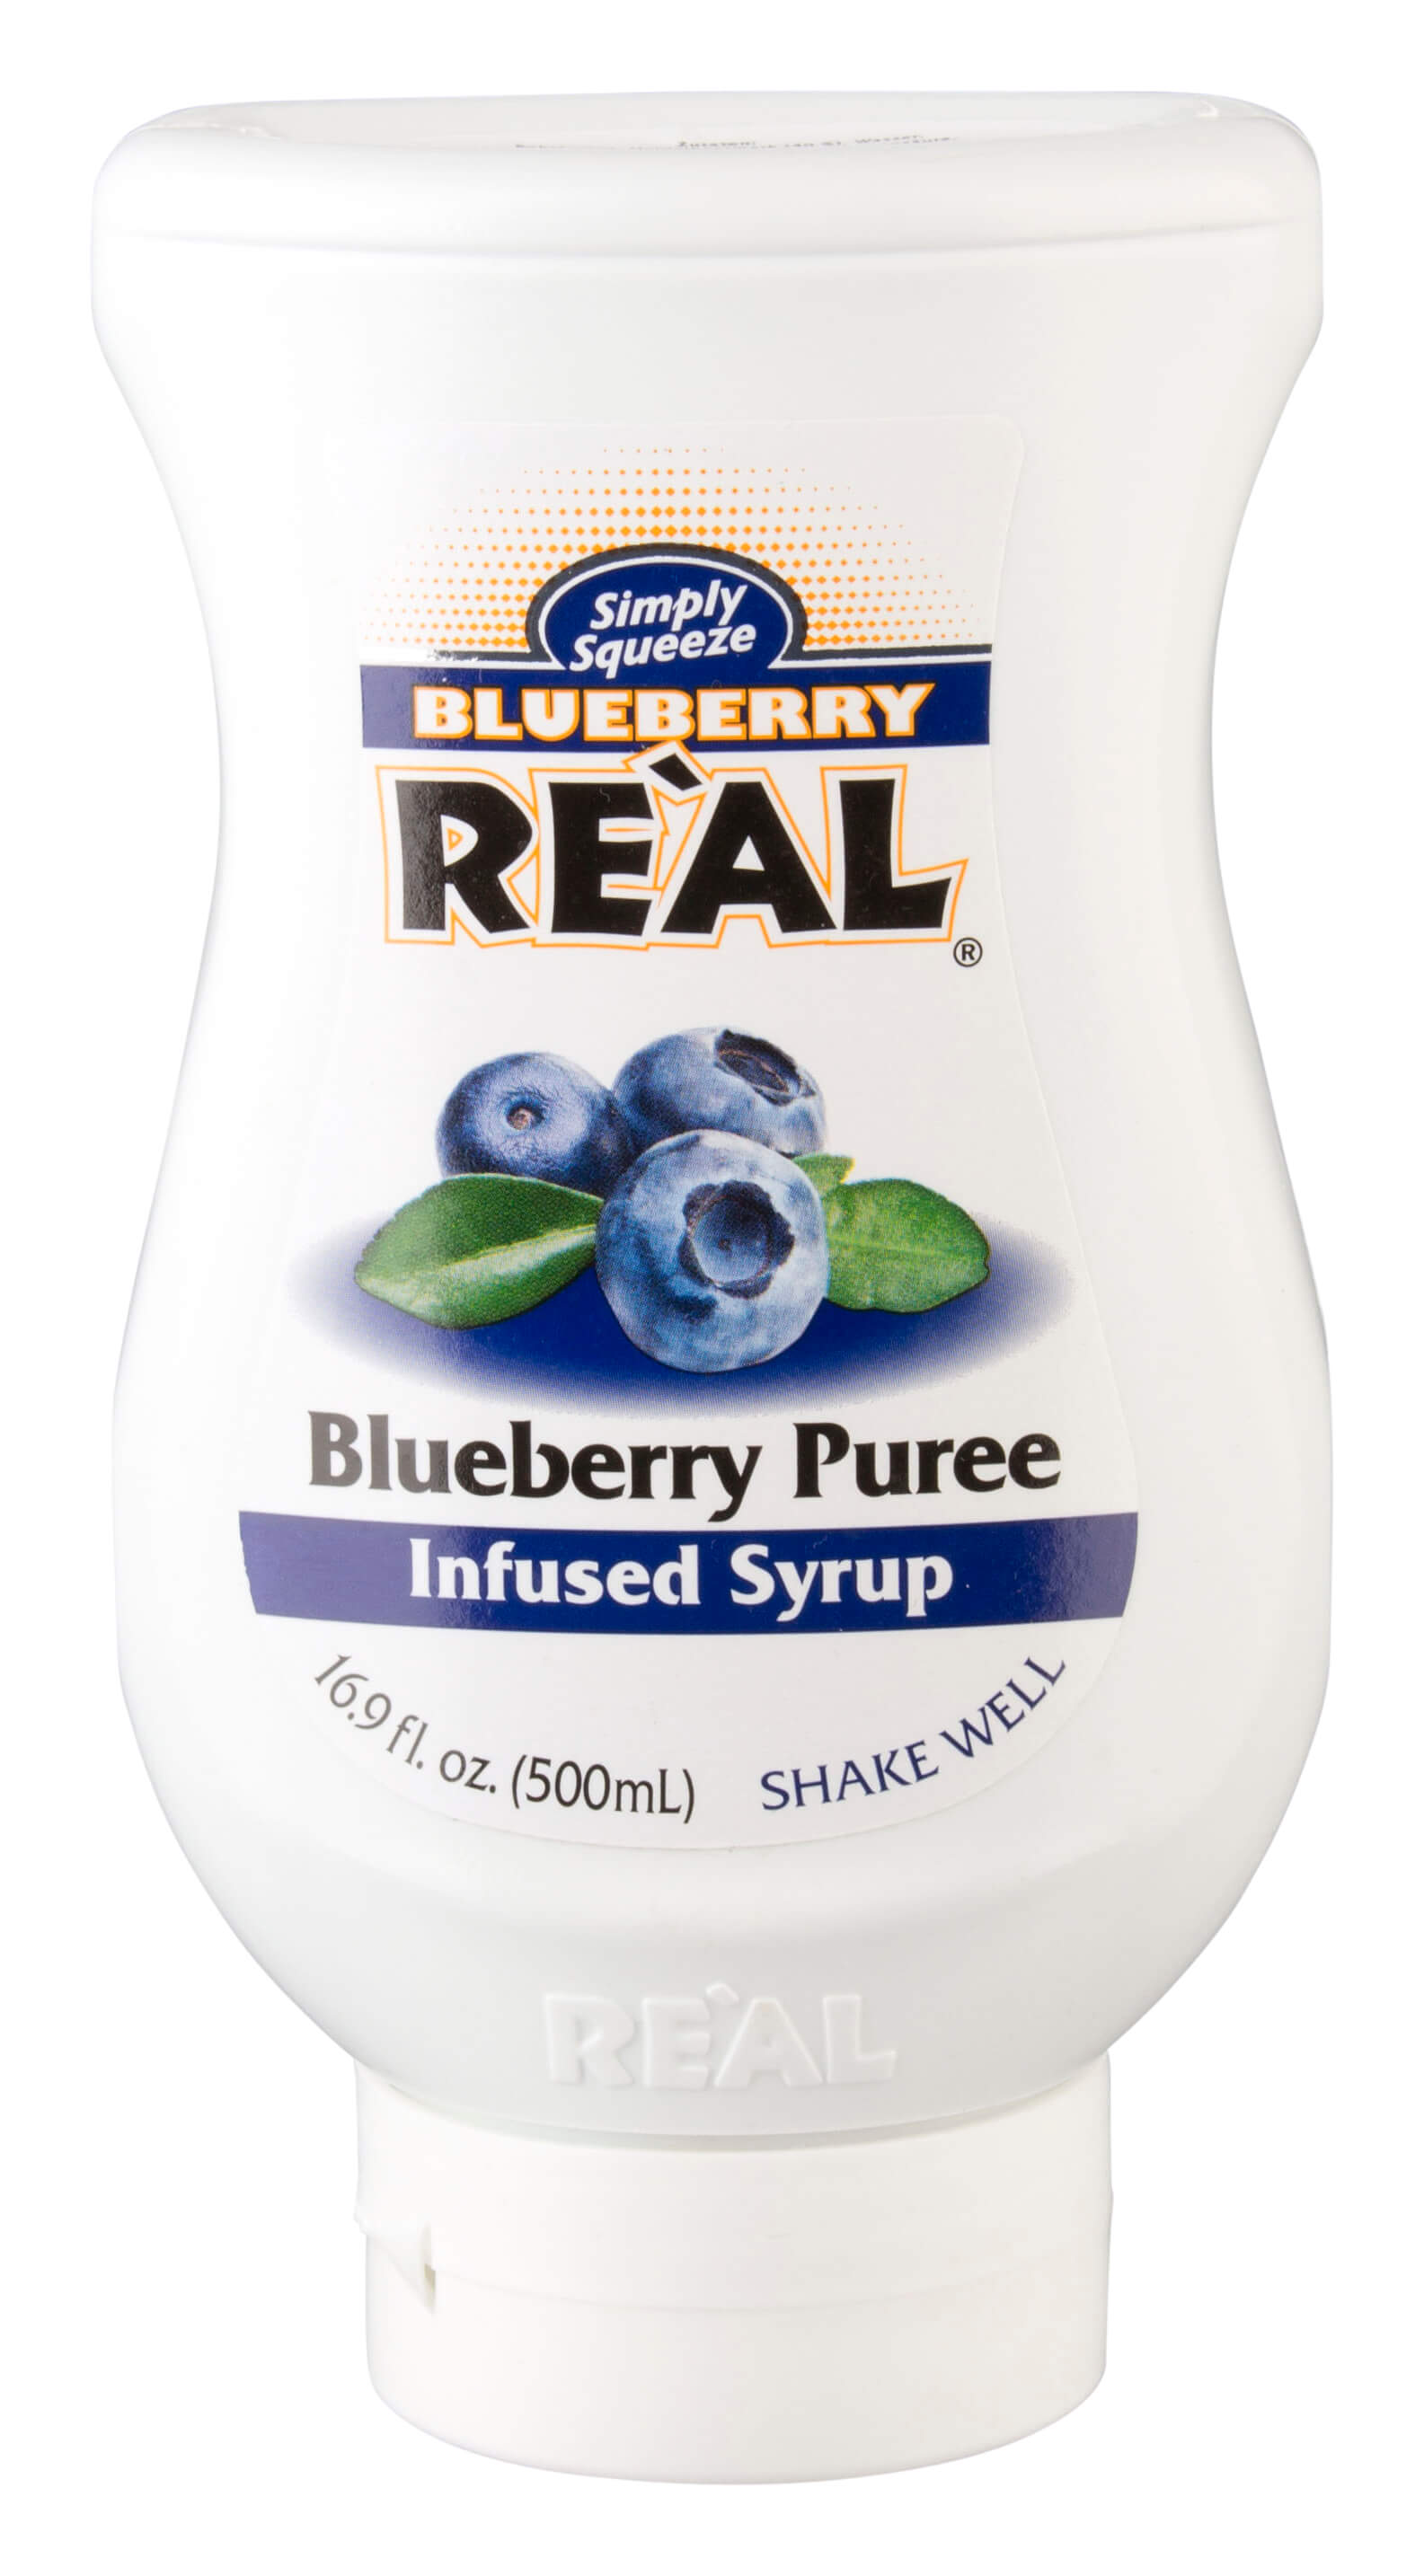 Blueberry Real - blueberry syrup (500ml)